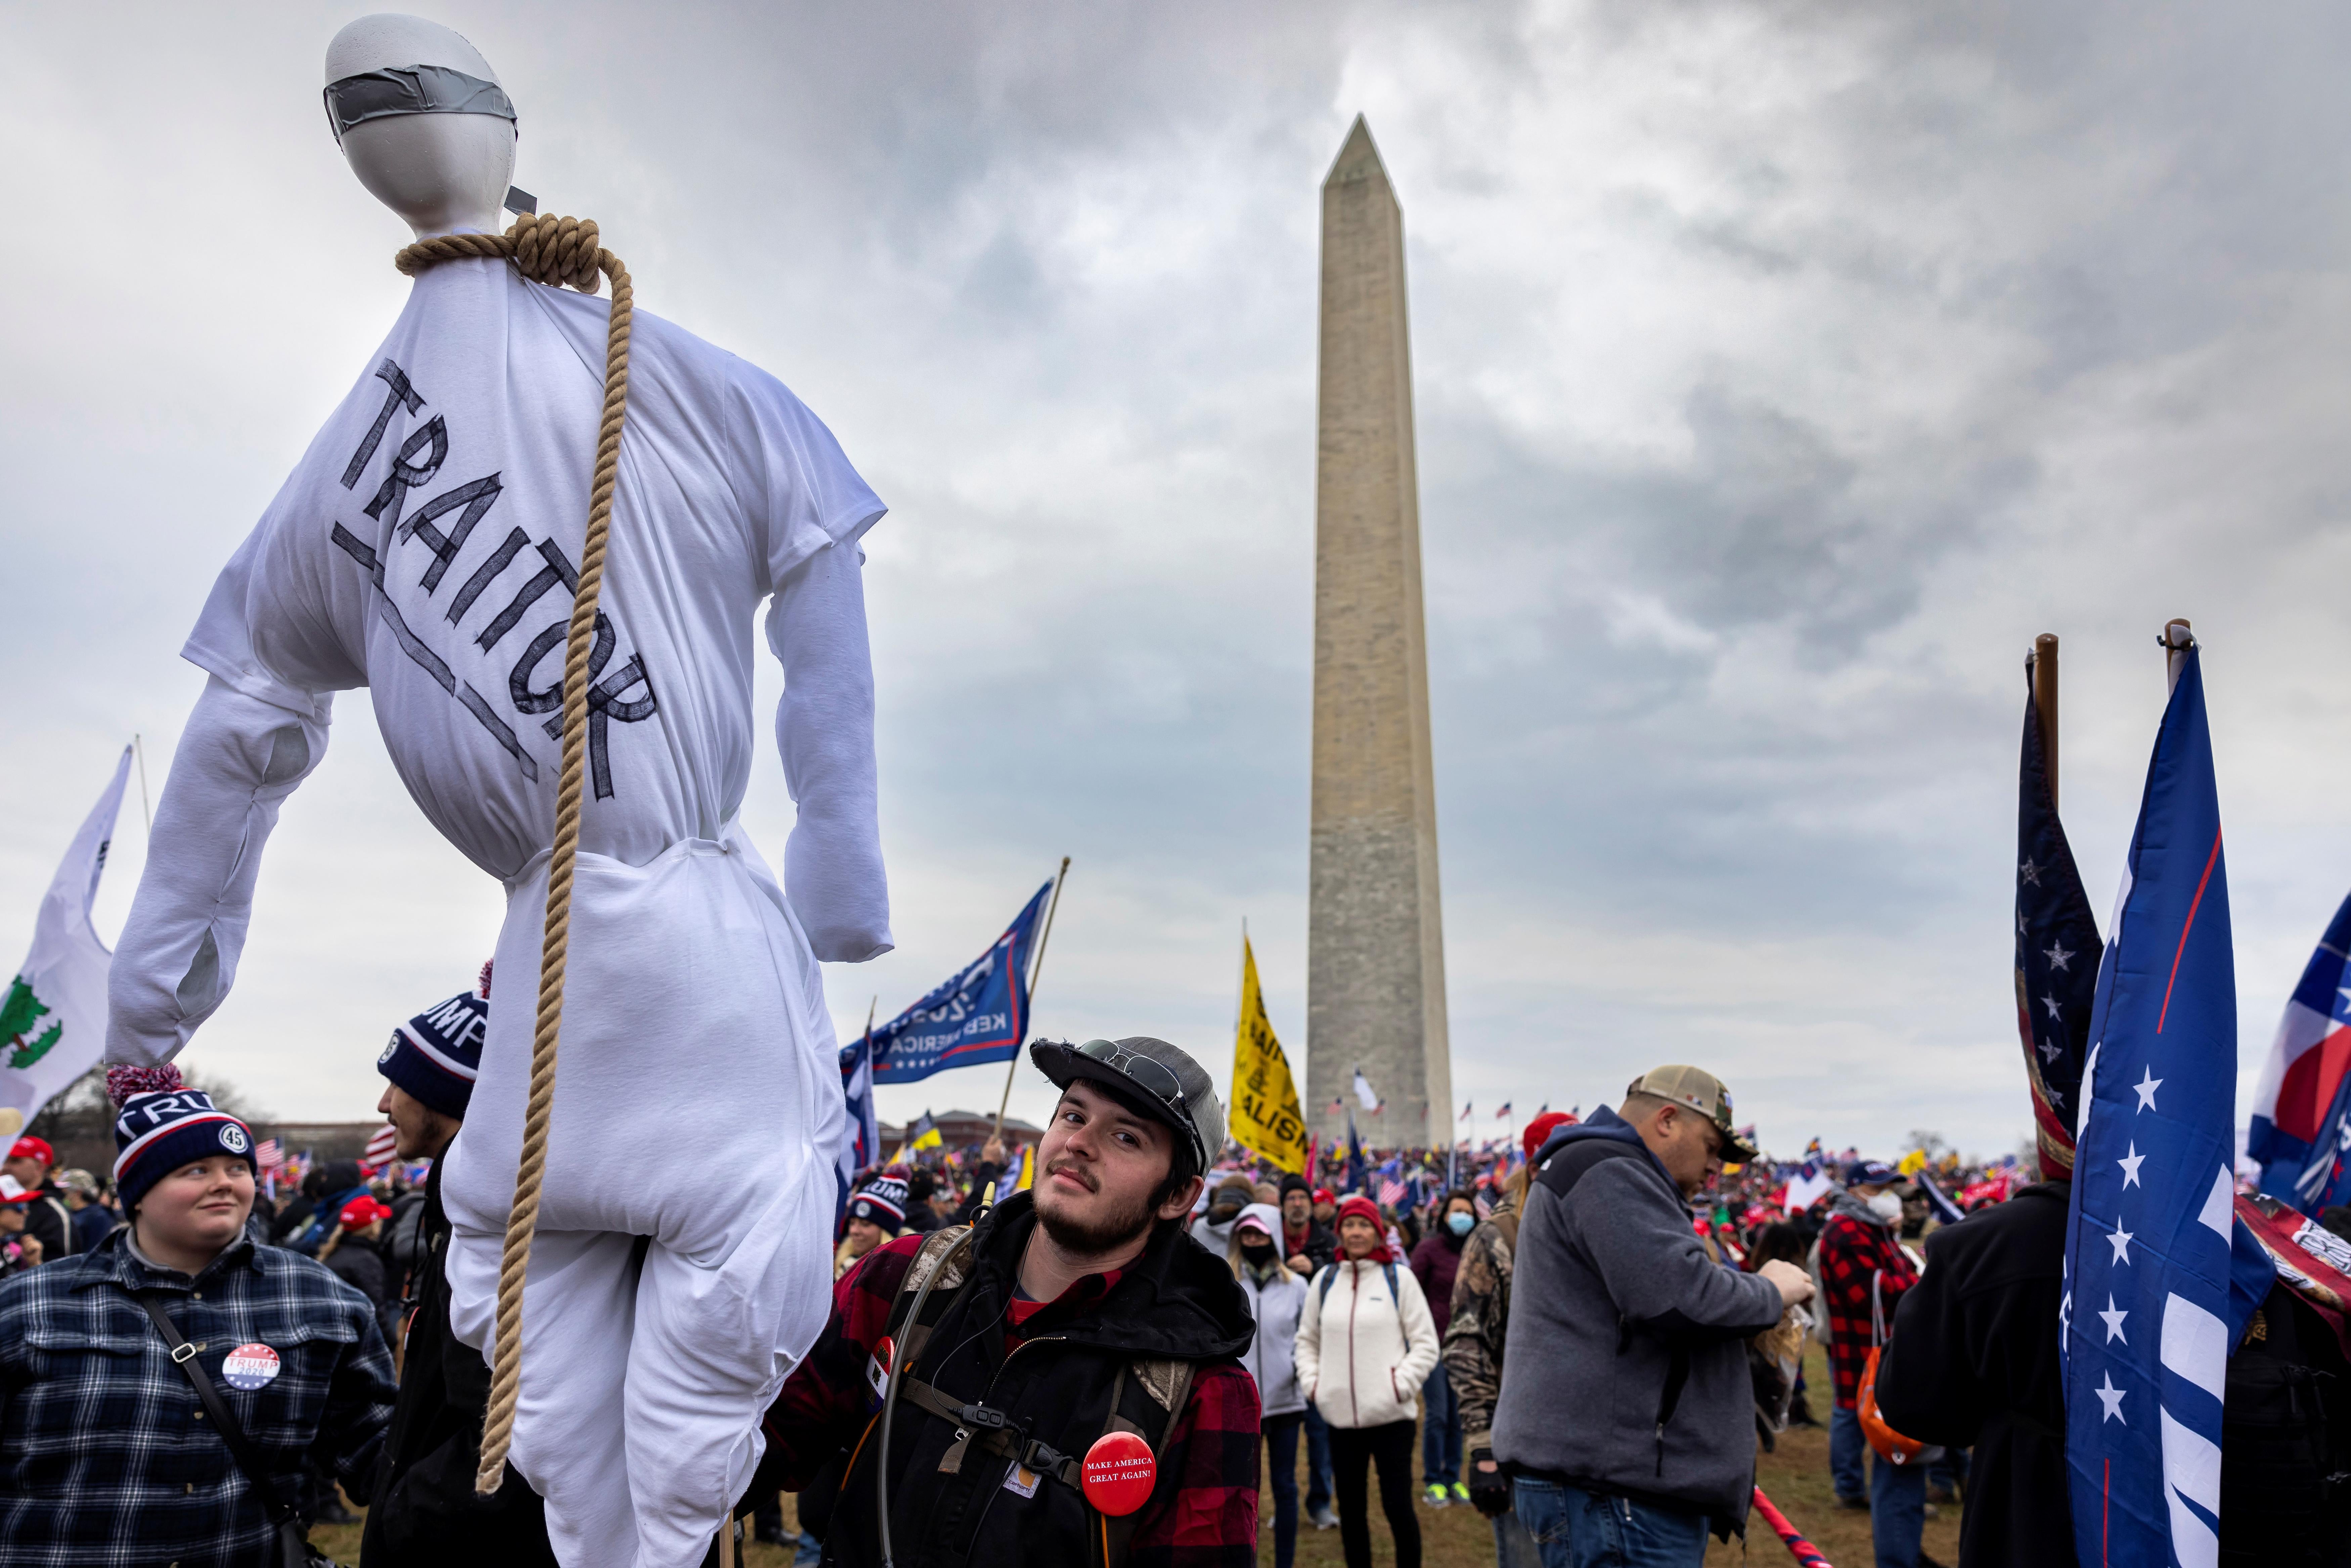 A mob of Trump supporters with the Washington Monument behind them, one carrying an effigy with the word "traitor" written on it and a noose around its neck.